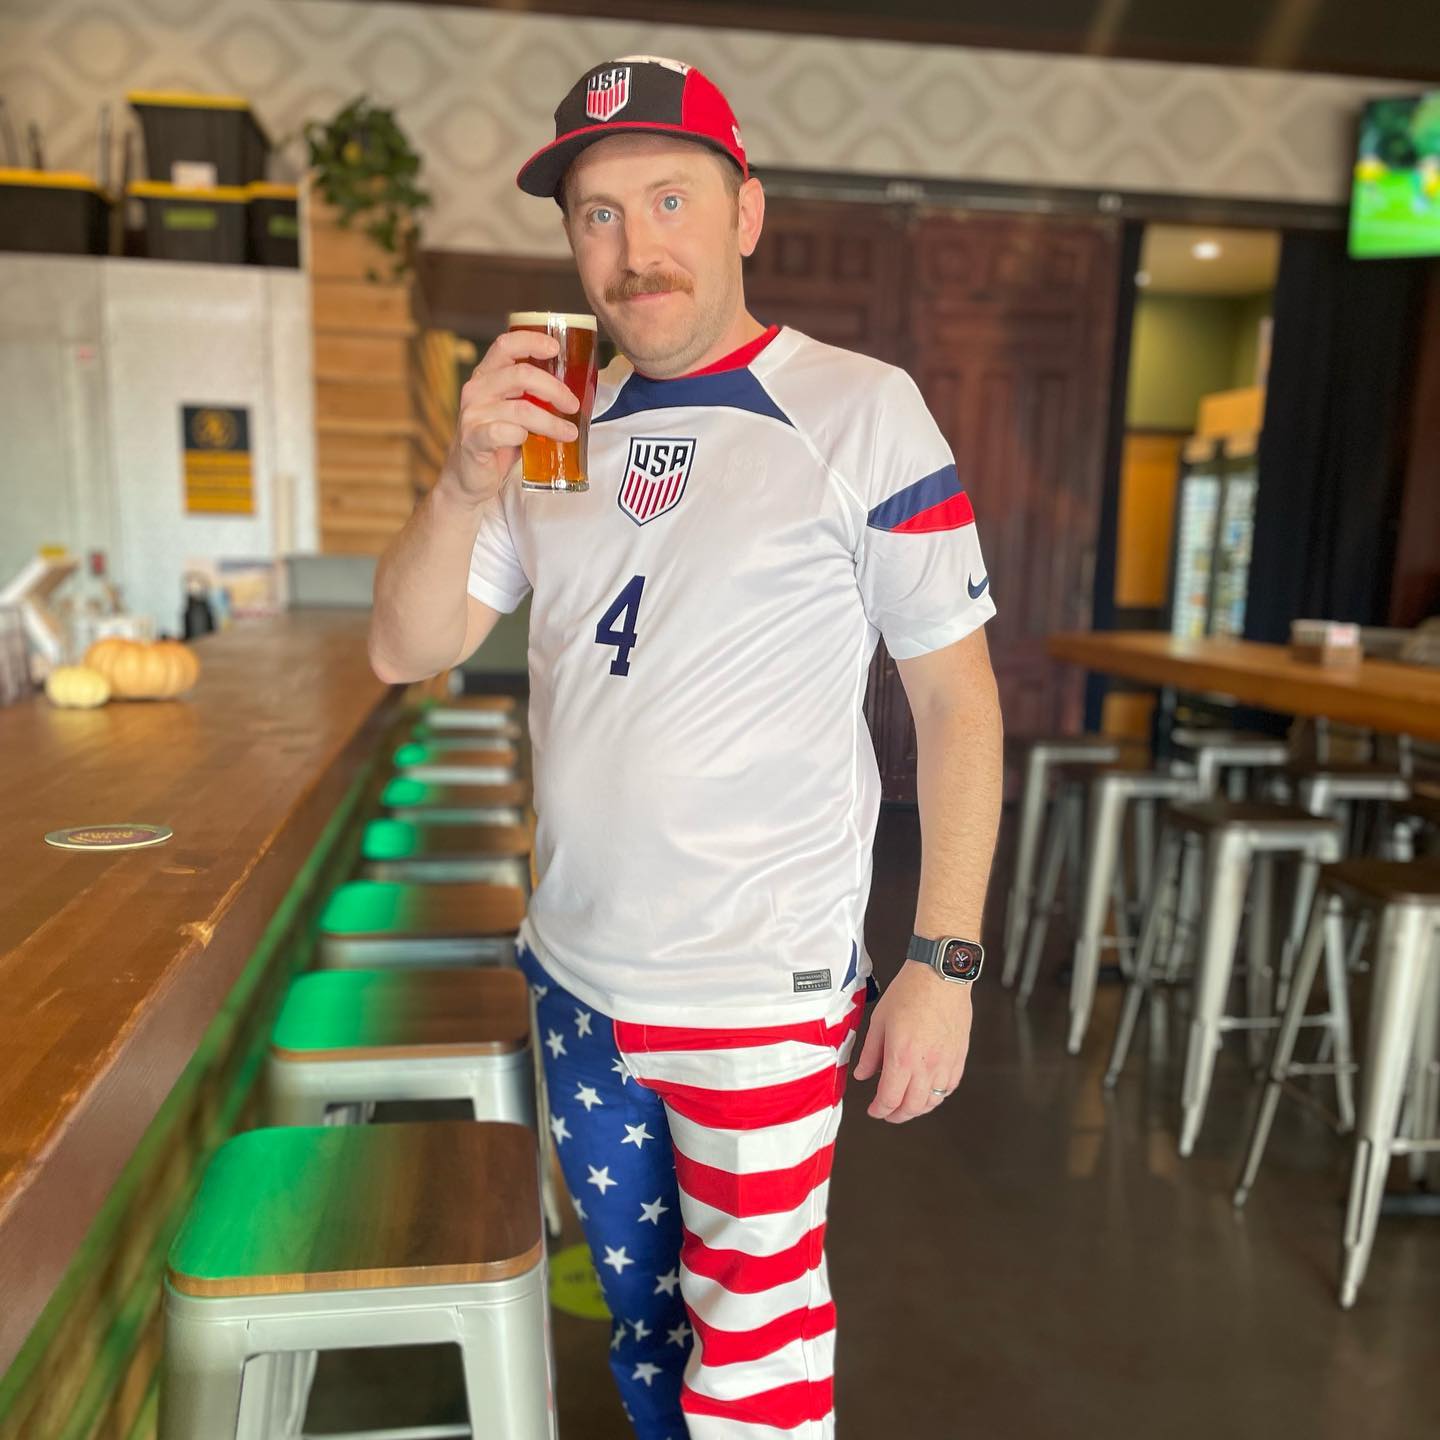 Ryan’s ready for the World Cup game, are you? 
@ryanflys 
.
.
.
.
#wildwoodtaphouse #wildwoodtap #worldcup #worldcup2022